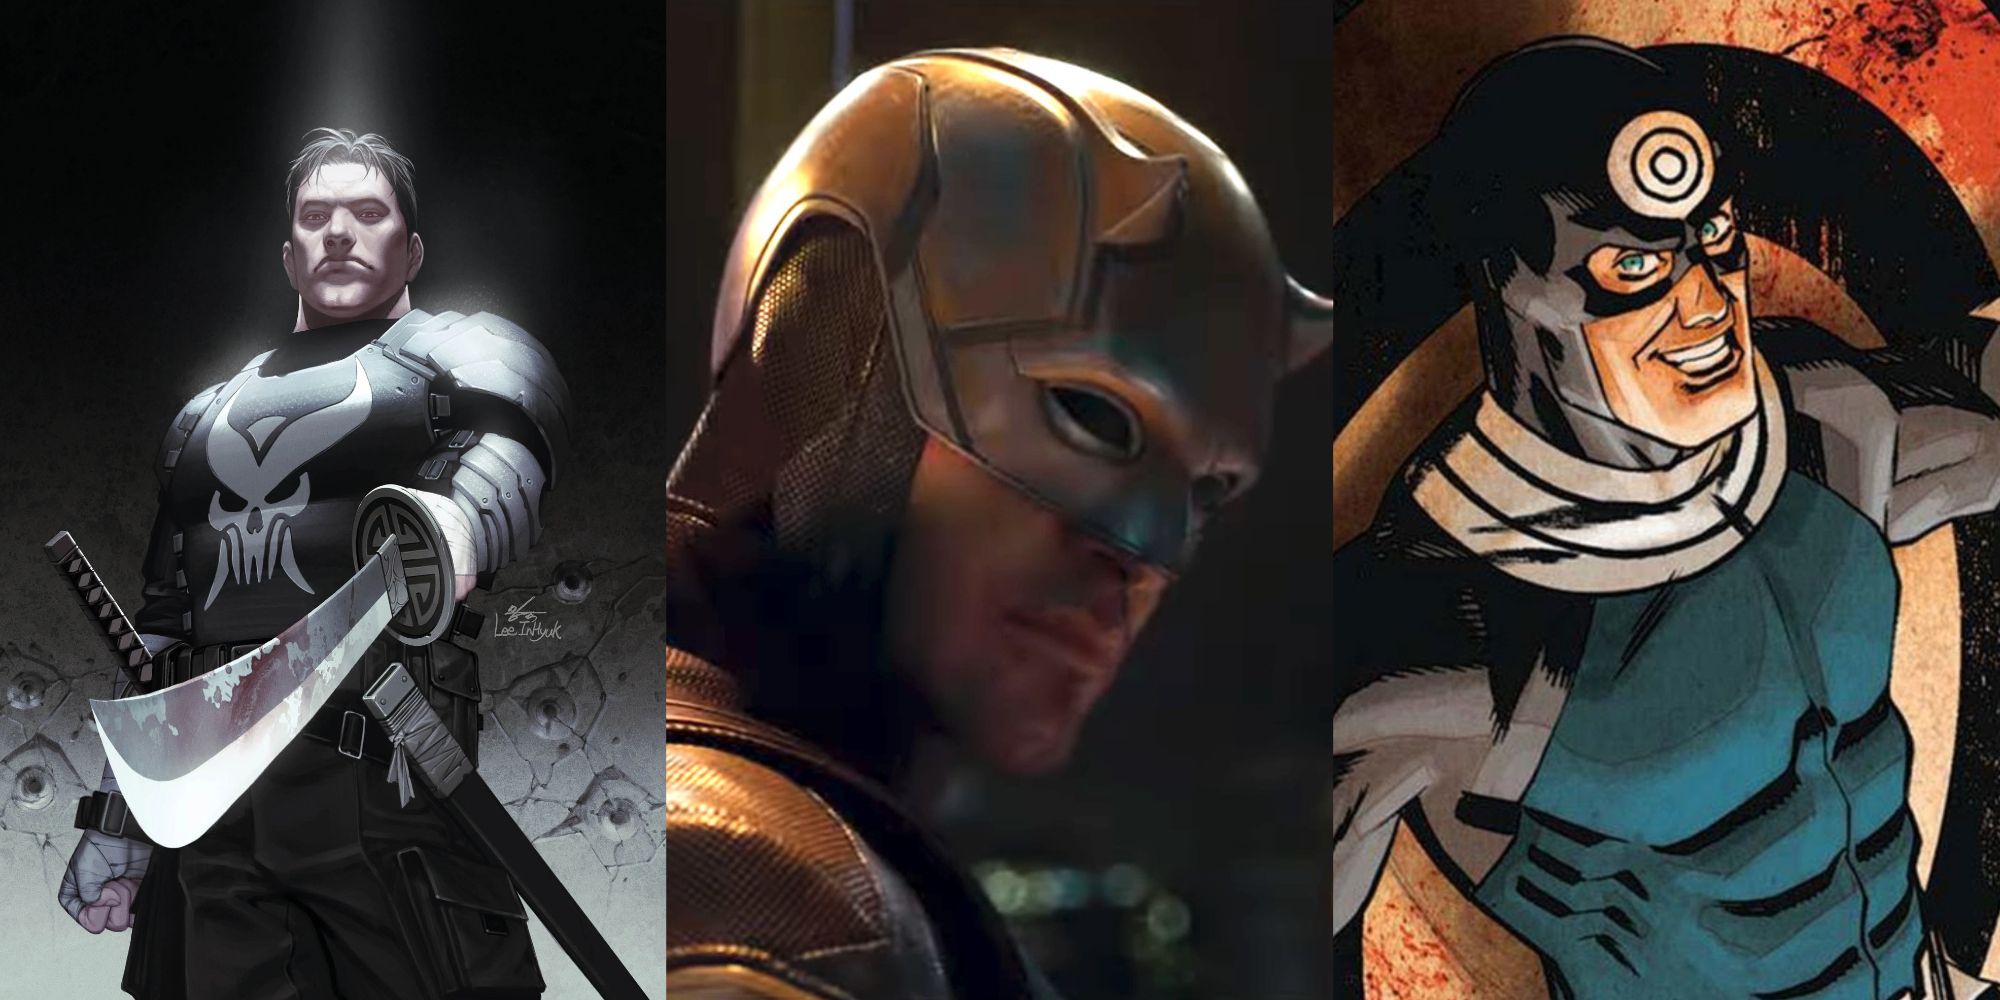 Split image of The Punisher from Marvel Comics, Daredevil from She-Hulk: Attorney At Law, and Bullseye from Marvel Comics.